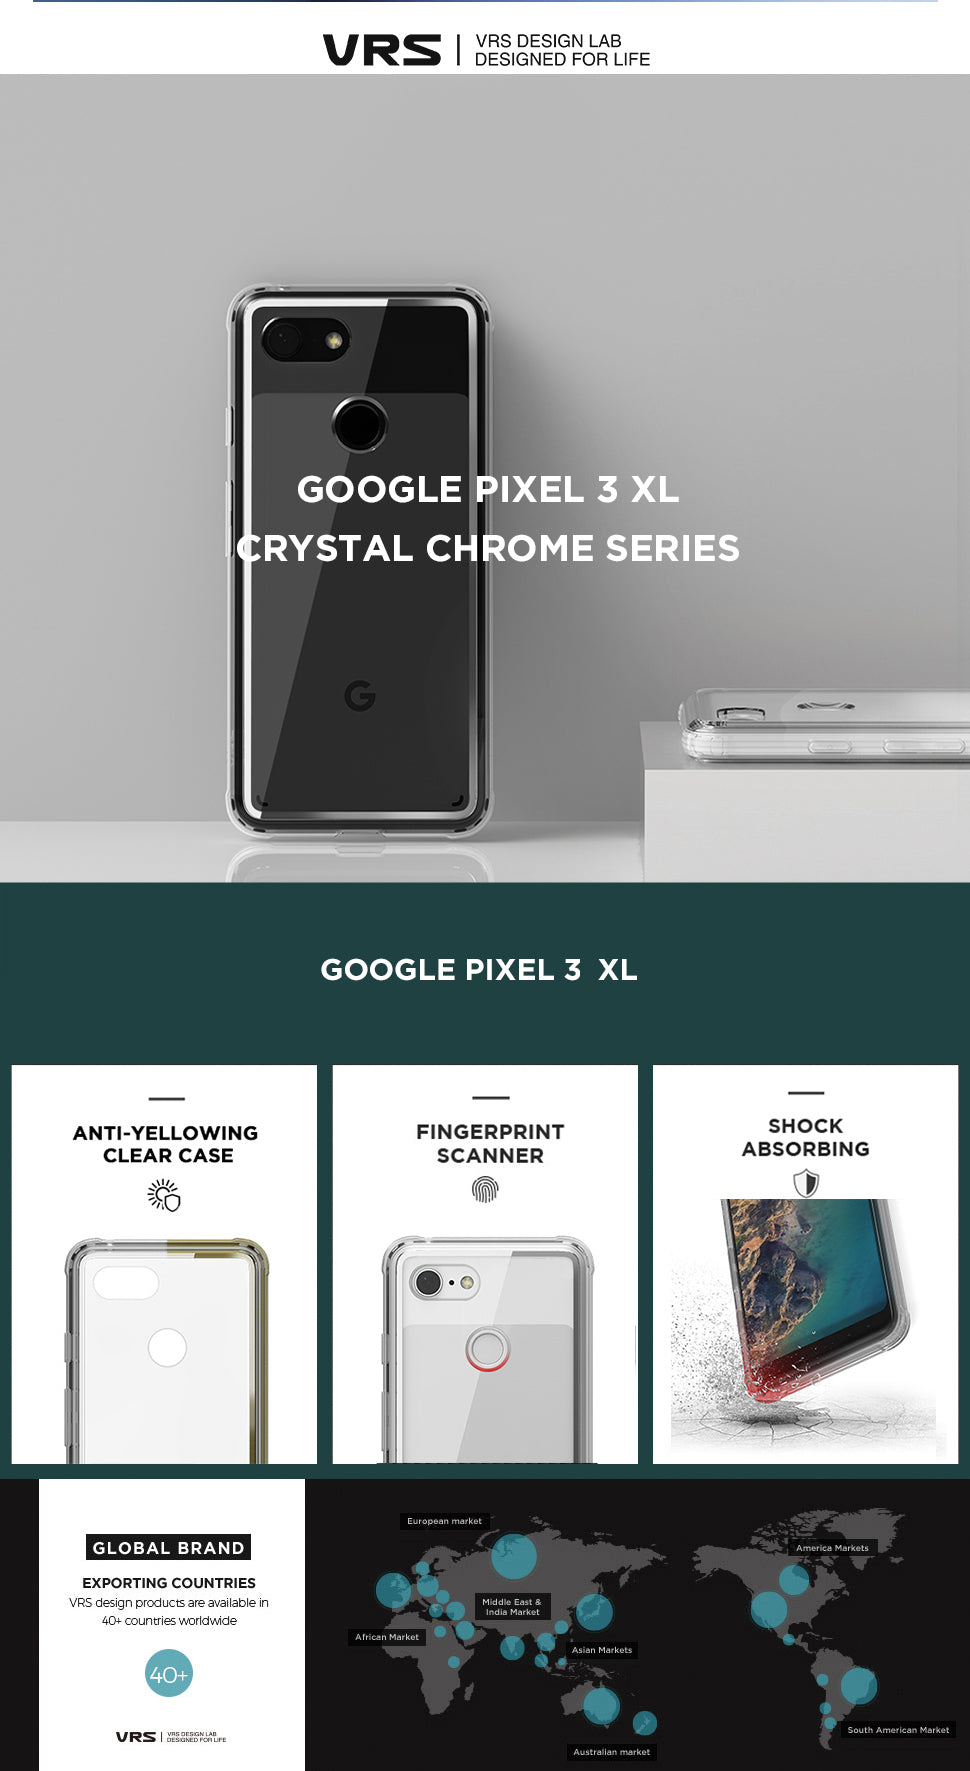 Best Clear Case for Google Pixel 3 XL Crystal Chrome Series From VRS Design